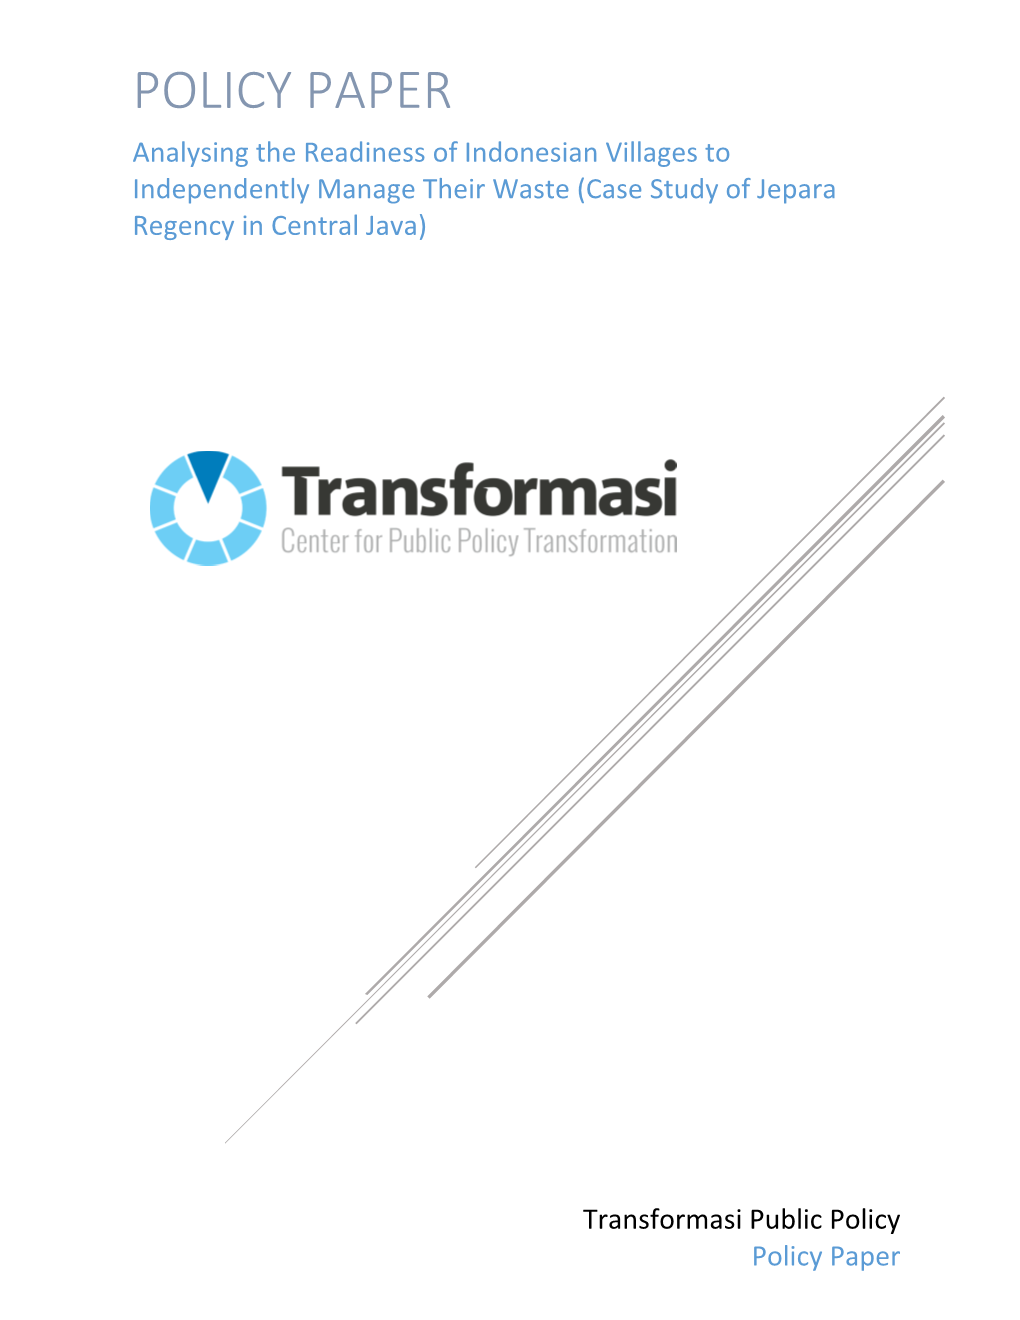 POLICY PAPER Analysing the Readiness of Indonesian Villages to Independently Manage Their Waste (Case Study of Jepara Regency in Central Java)